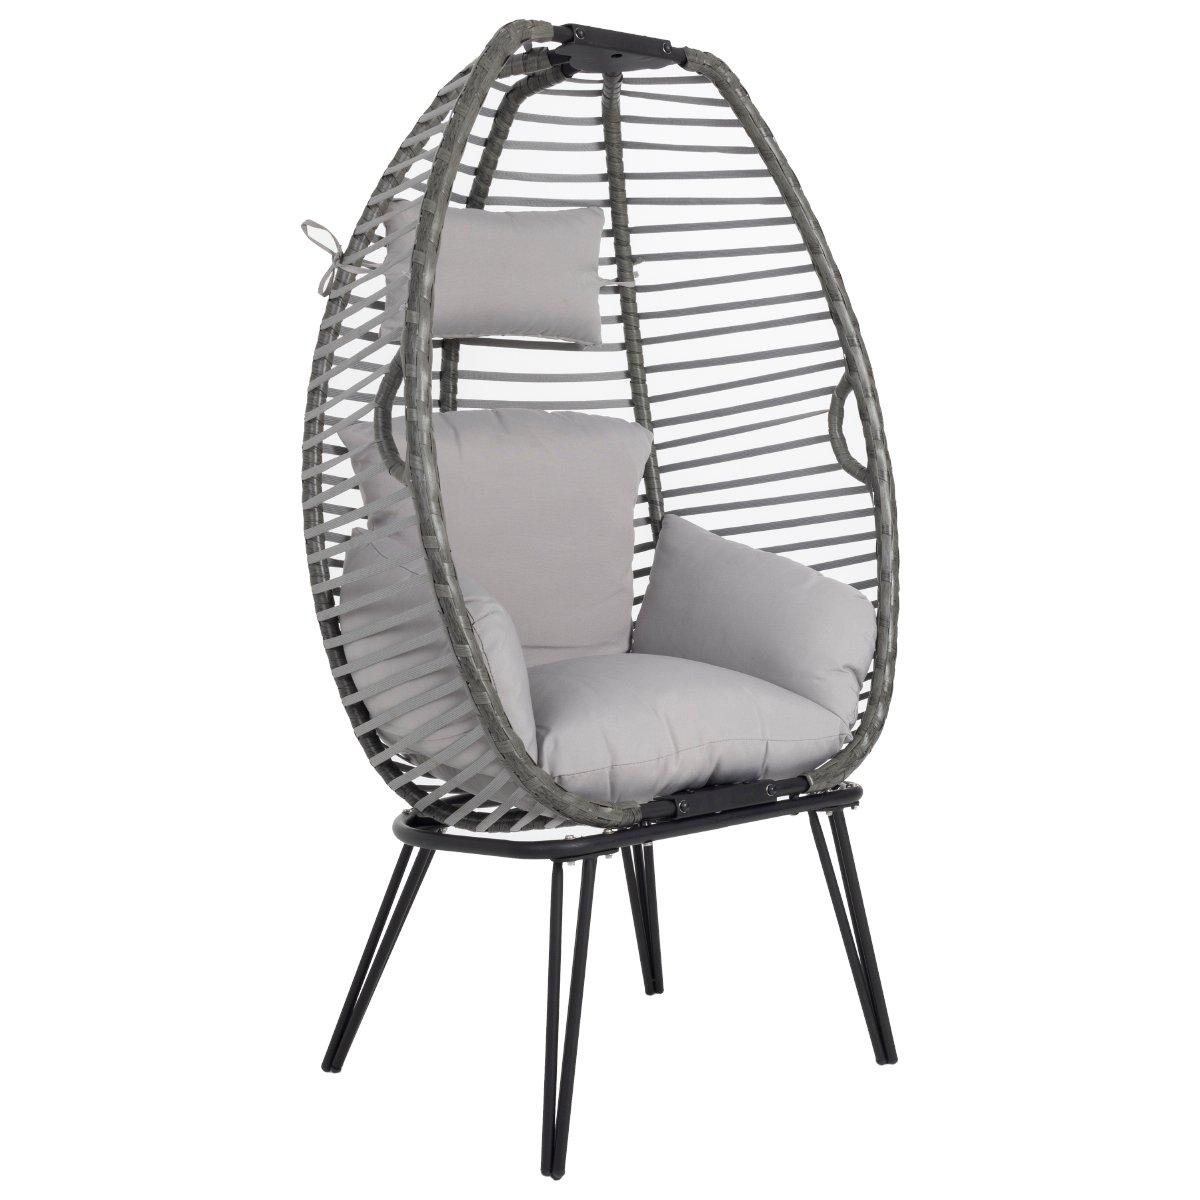 Egg Shaped Chair Wicker & Rope Basket Grey Outdoor Furniture